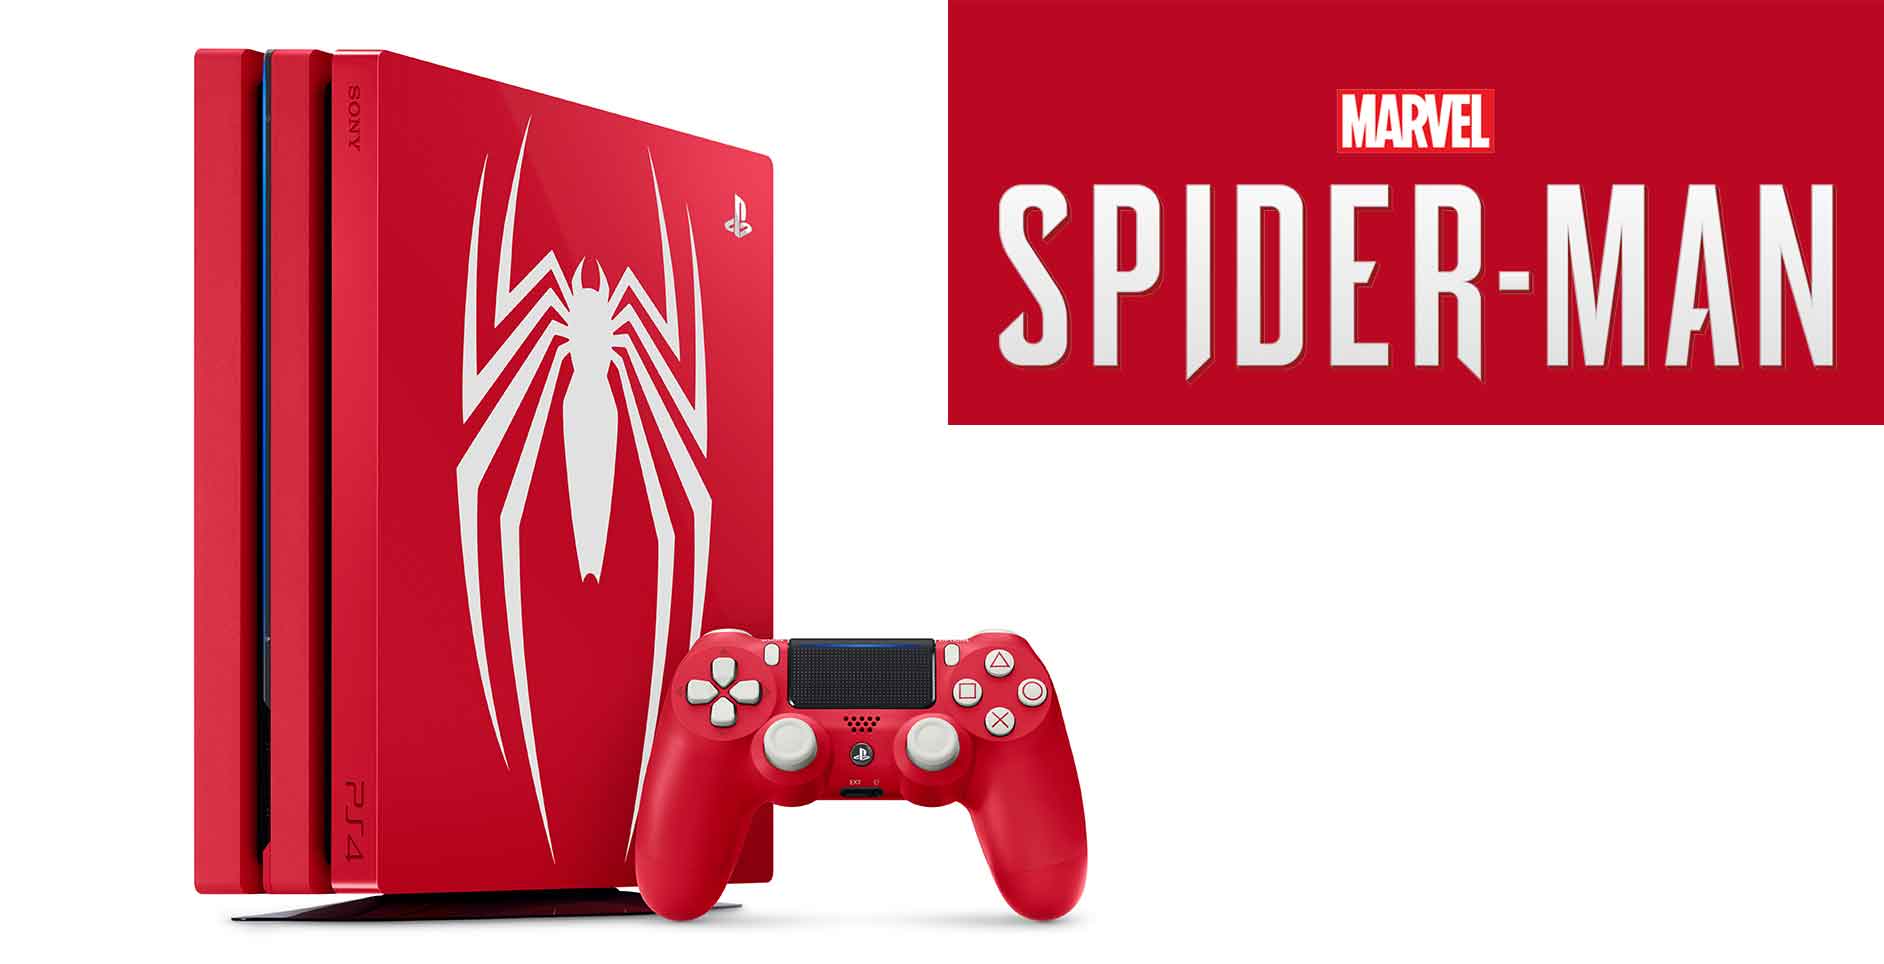 spider man ps4 limited edition